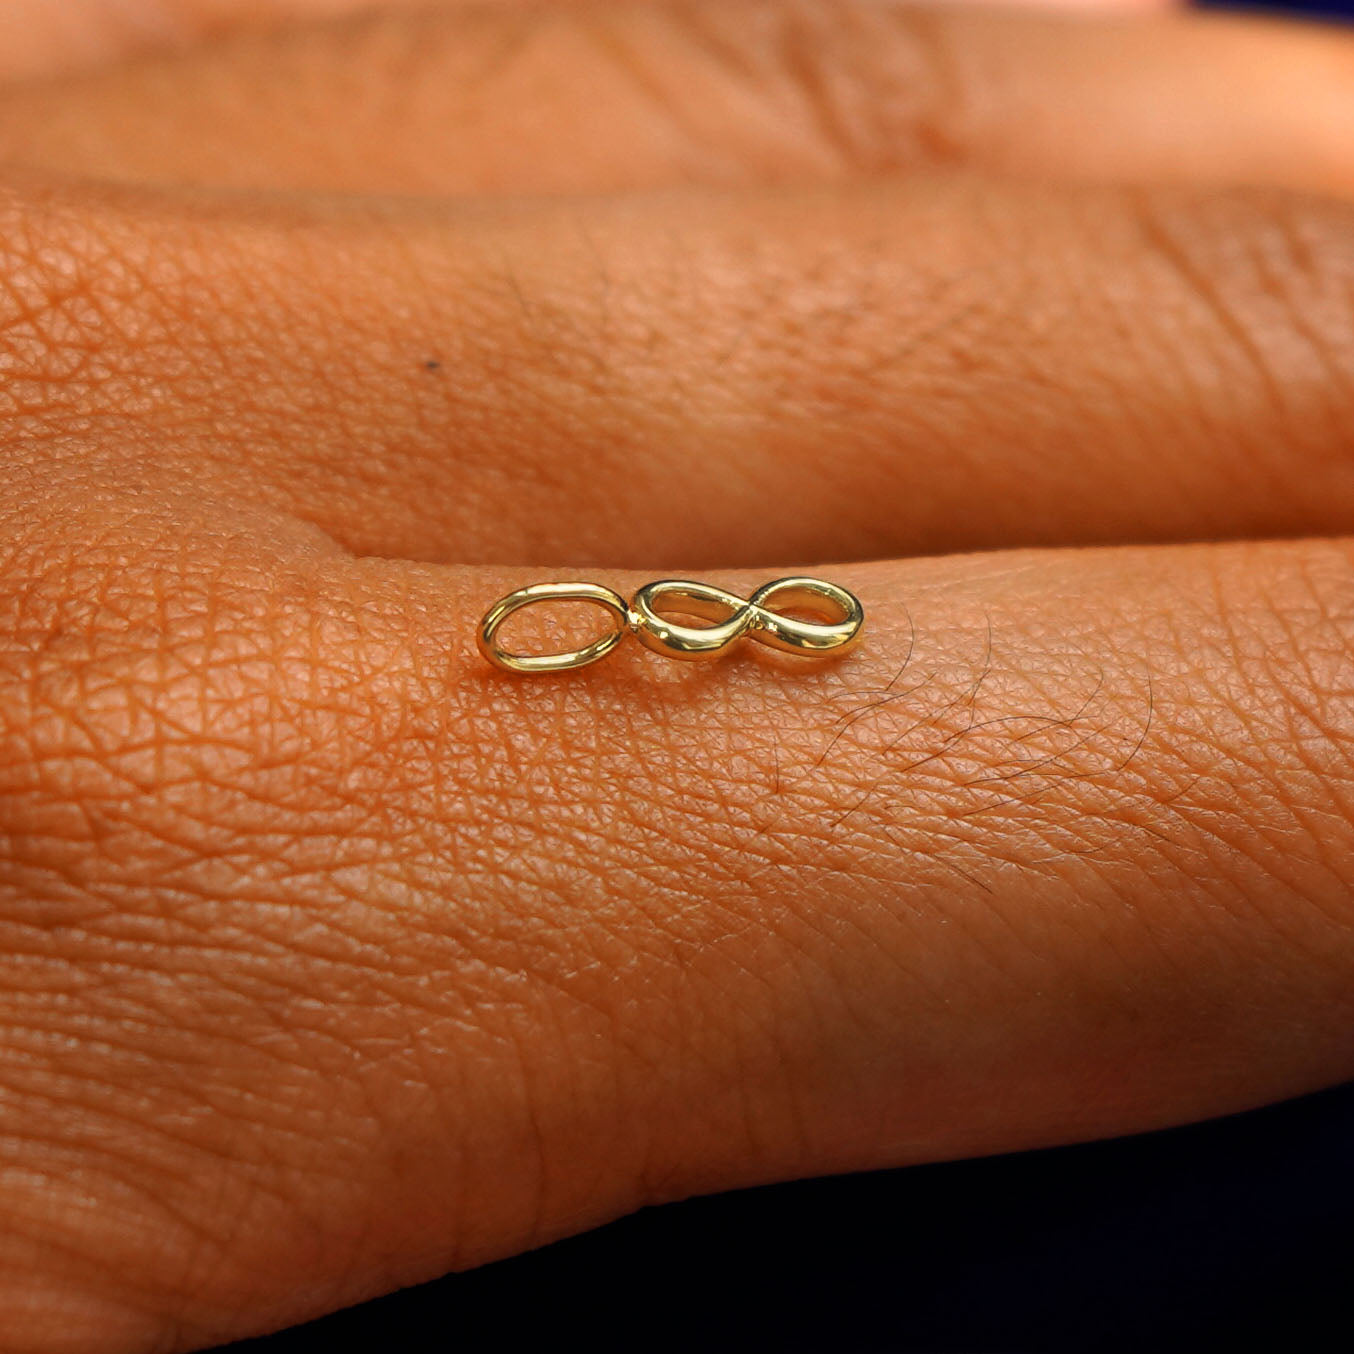 A 14k yellow gold Infinity Charm for chain balancing on the back of a model's finger